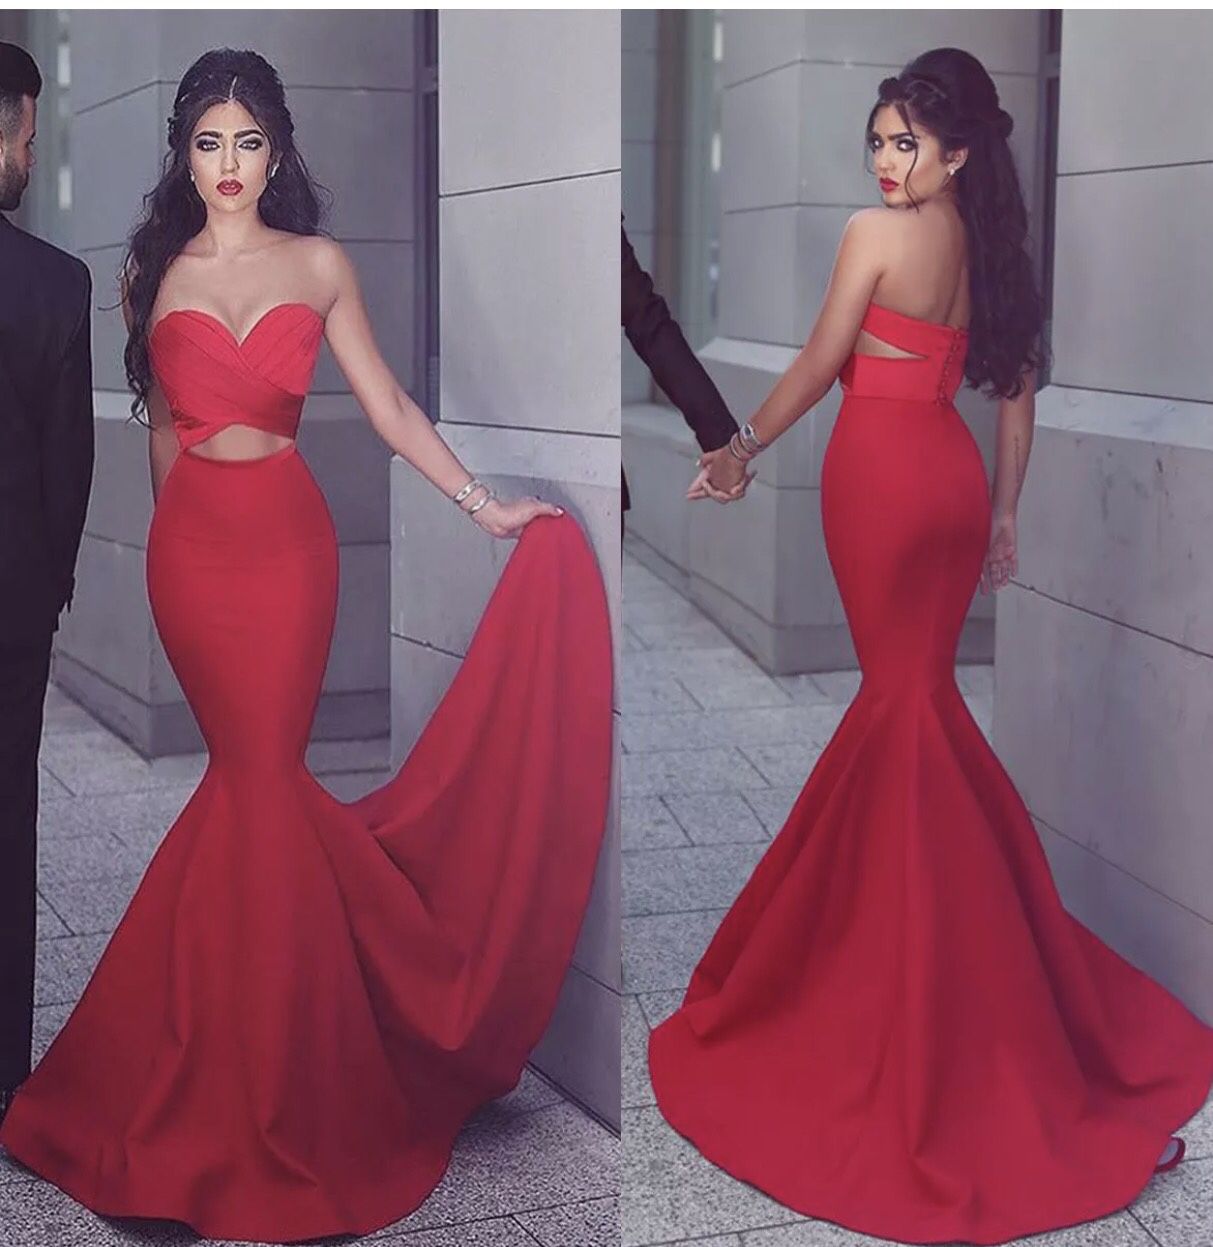 Smoking hot Red Quinceanera or Gothic Mermaid Dress